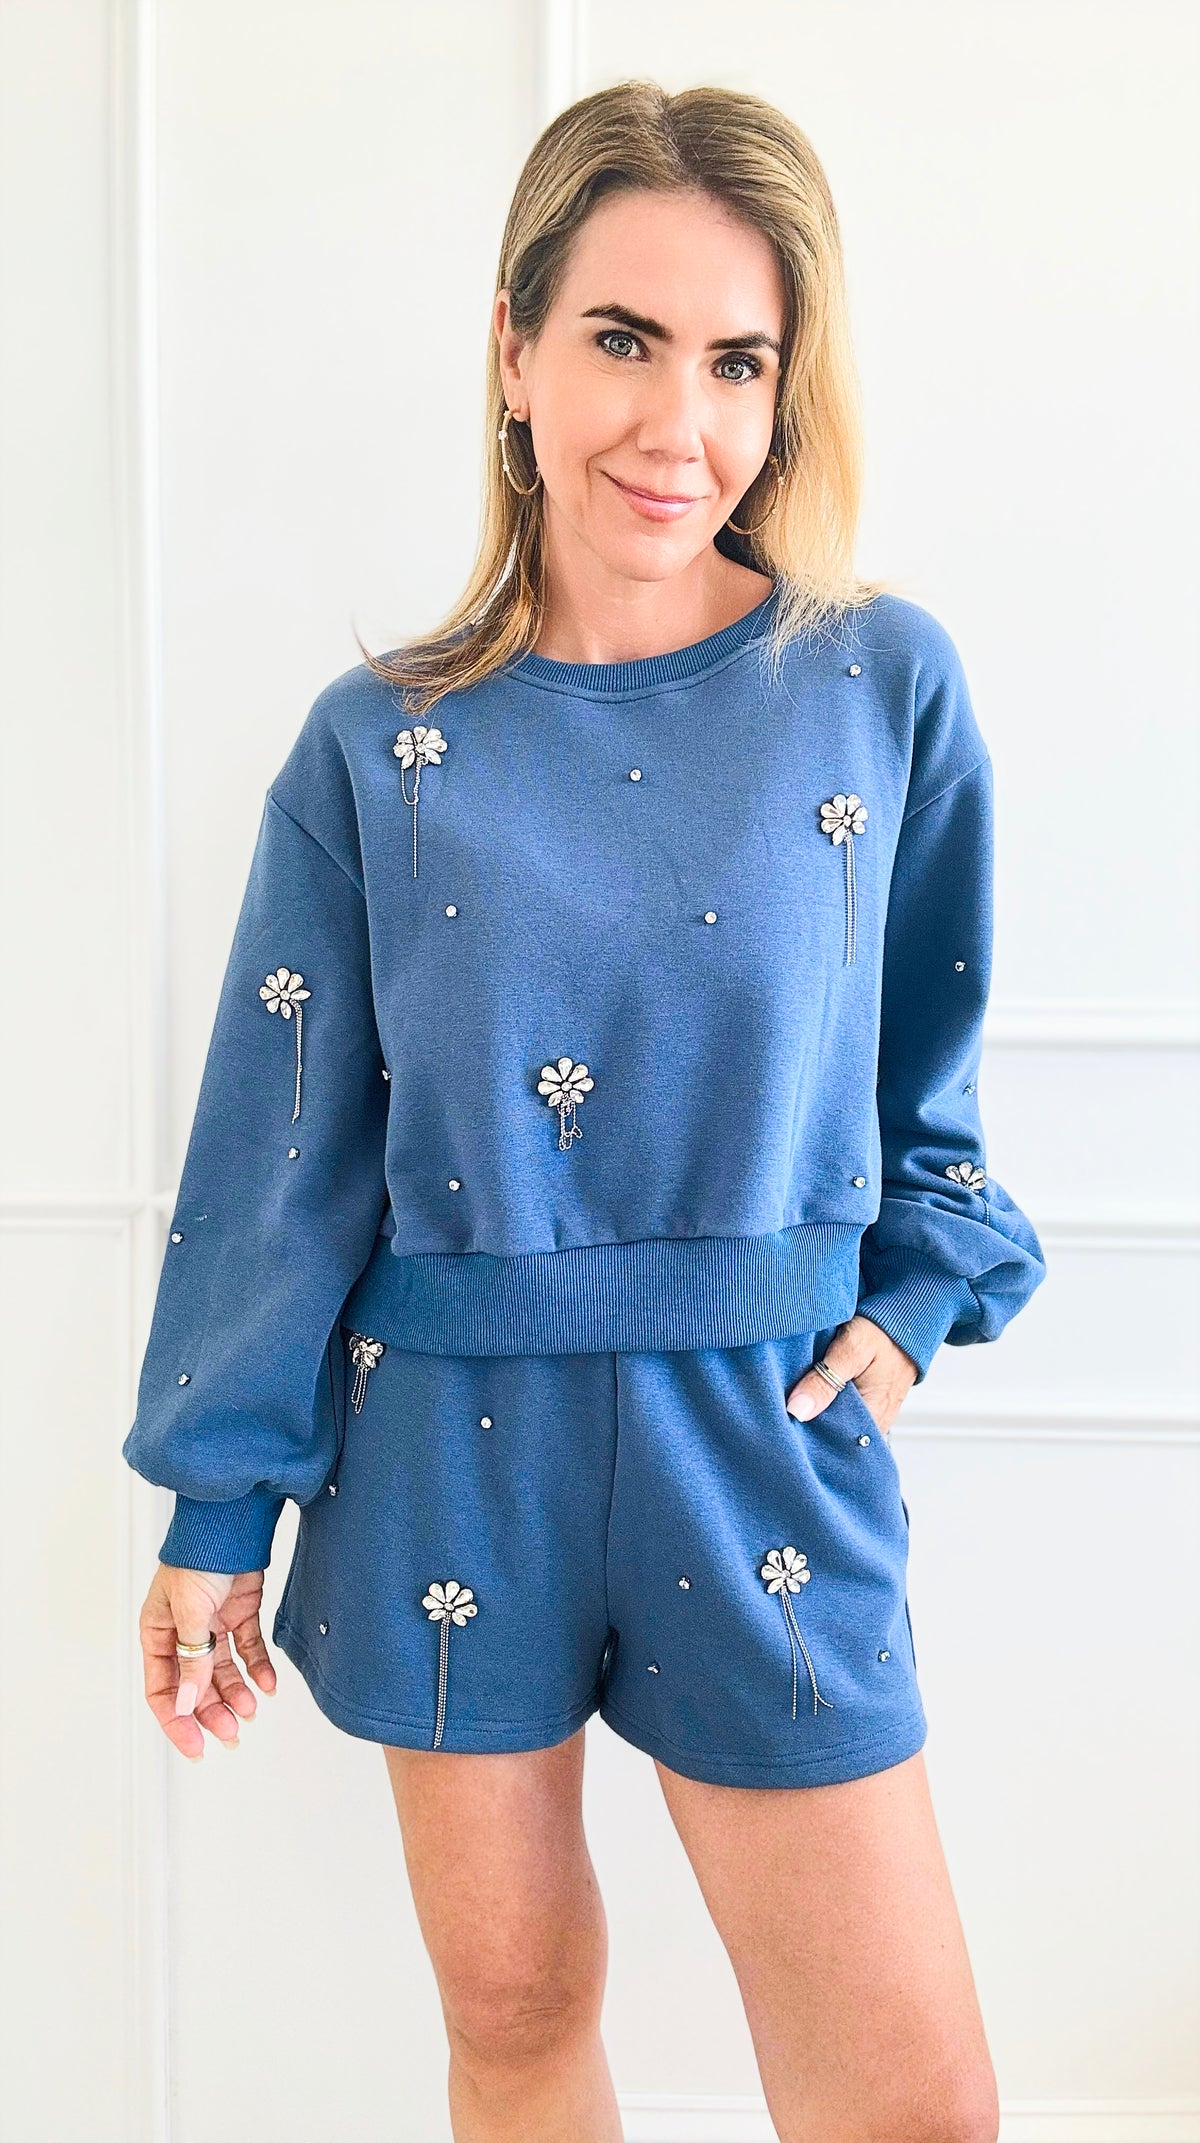 Rhinestone Flower Cropped Set-130 Long Sleeve Tops-Main Strip-Coastal Bloom Boutique, find the trendiest versions of the popular styles and looks Located in Indialantic, FL